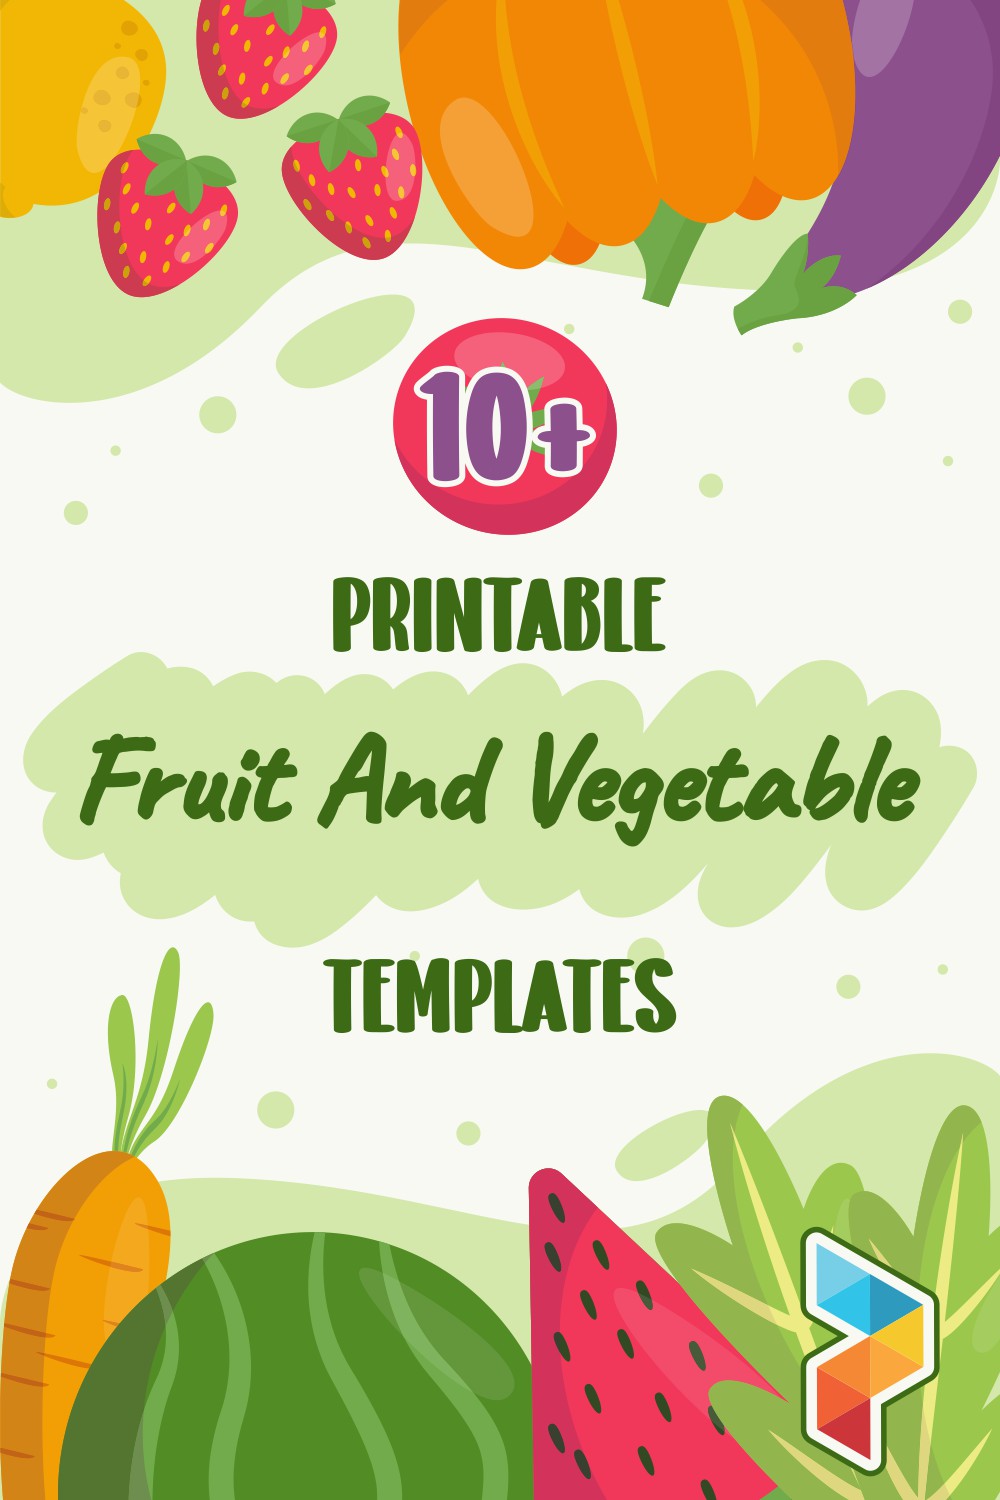 Fruit And Vegetable Templates